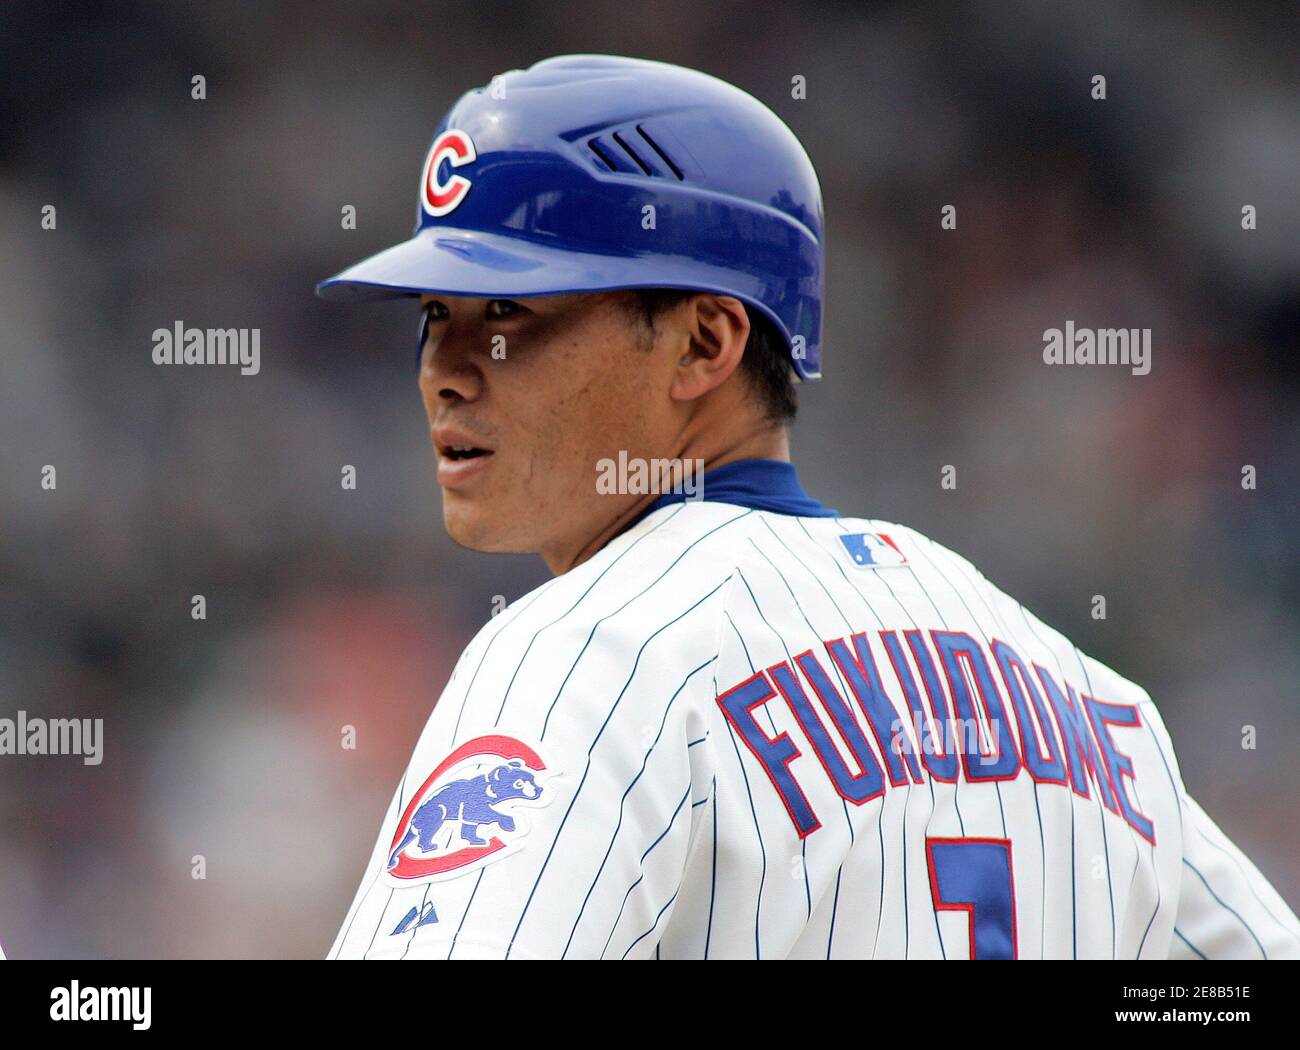 Chicago Cubs player Kosuke Fukudome looks toward first base coach Matt  Sinatro after hitting a single in the second inning of their National  League baseball game against the New York Mets in